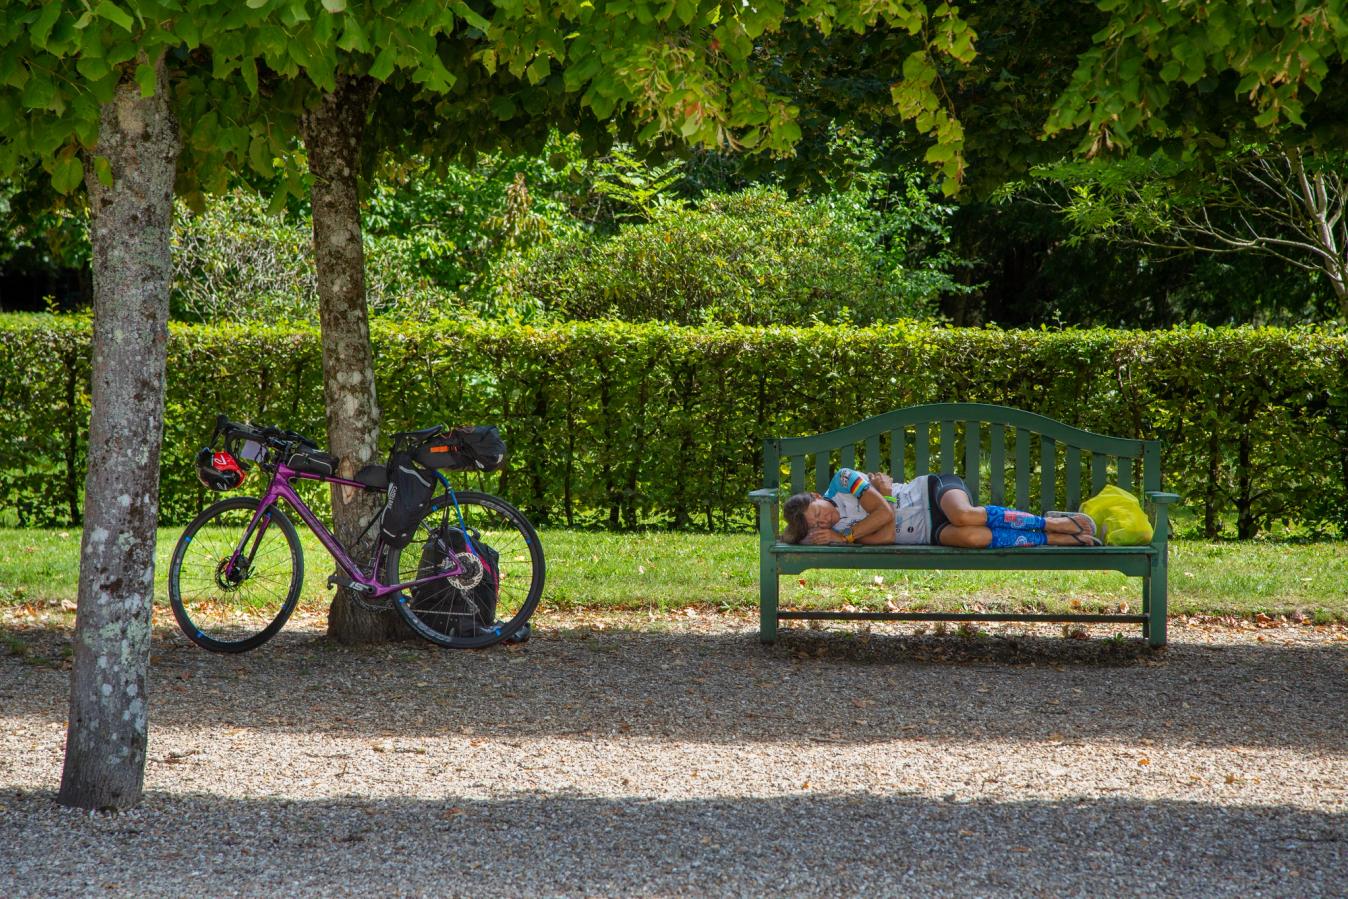 For a few days, North West France was littered with sleeping cyclists